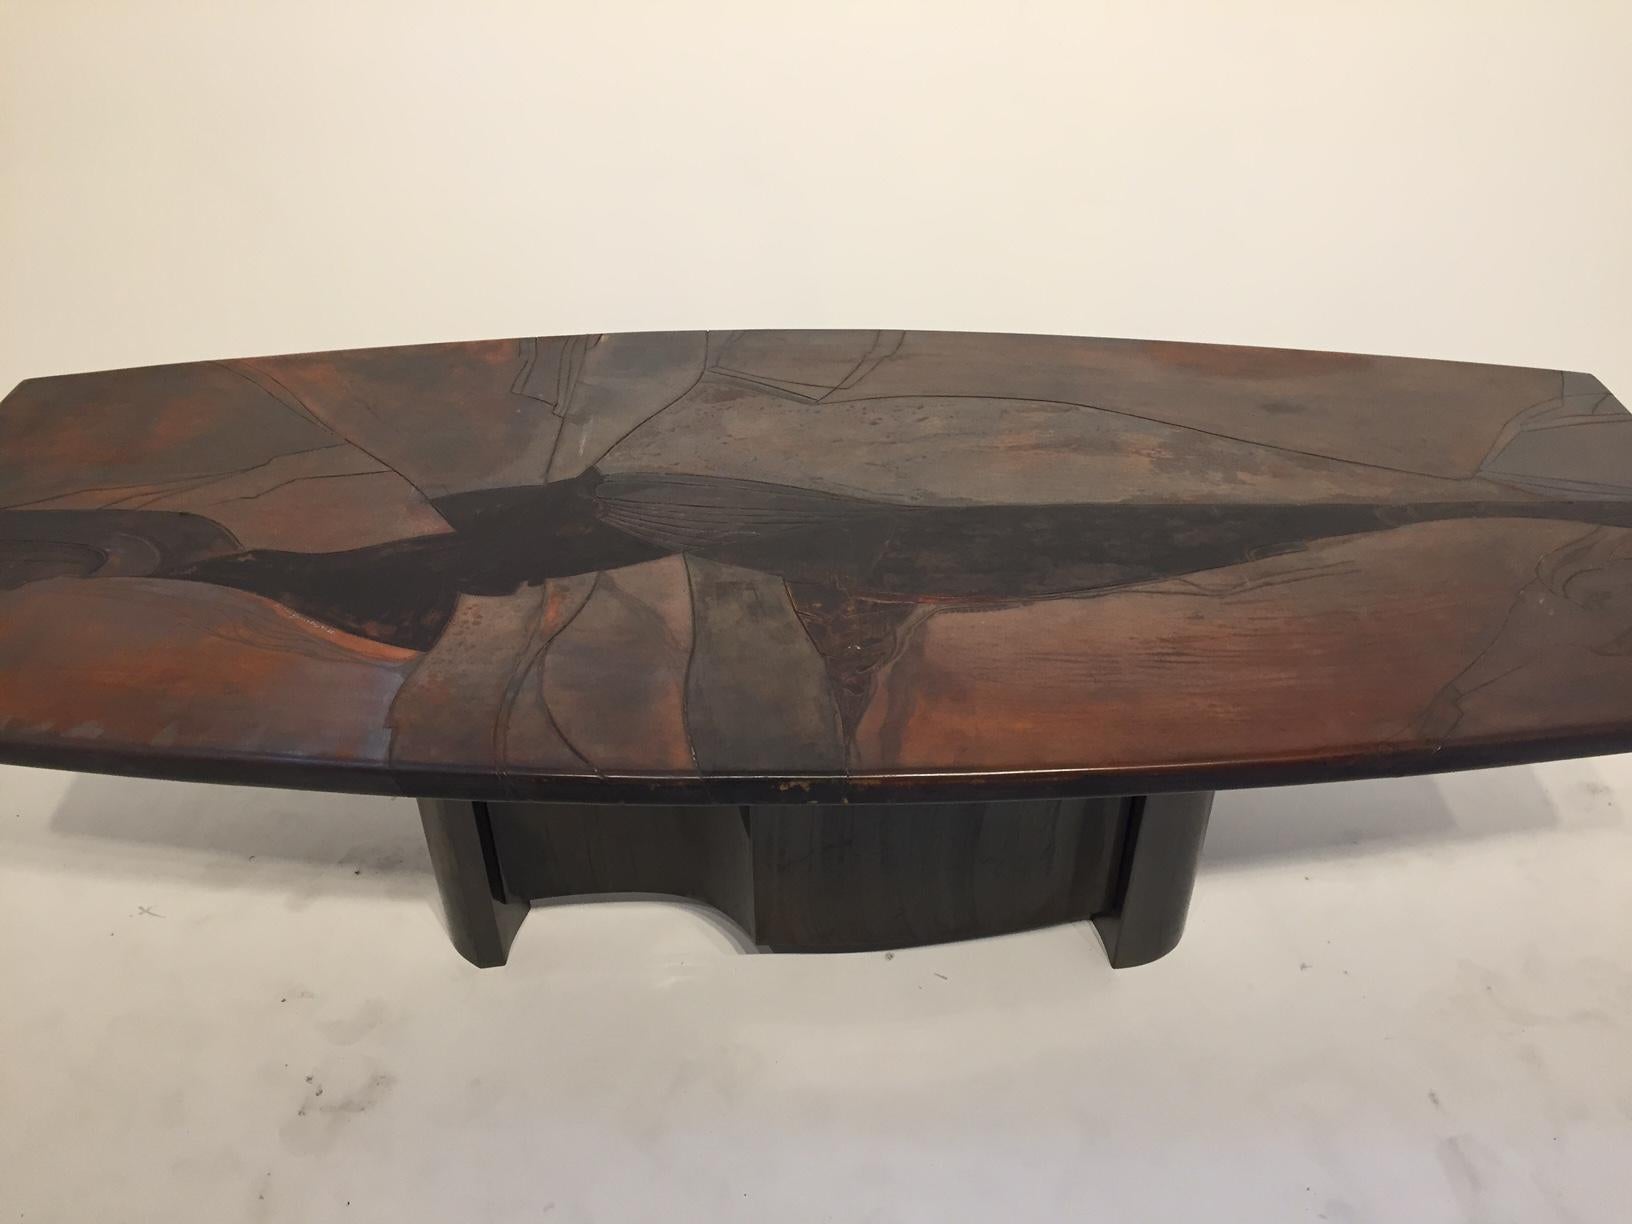 Rare and exceptional Leather dining table or desk with metal feet by Armand Jonckers.
Only 3 tables with that composition exist.